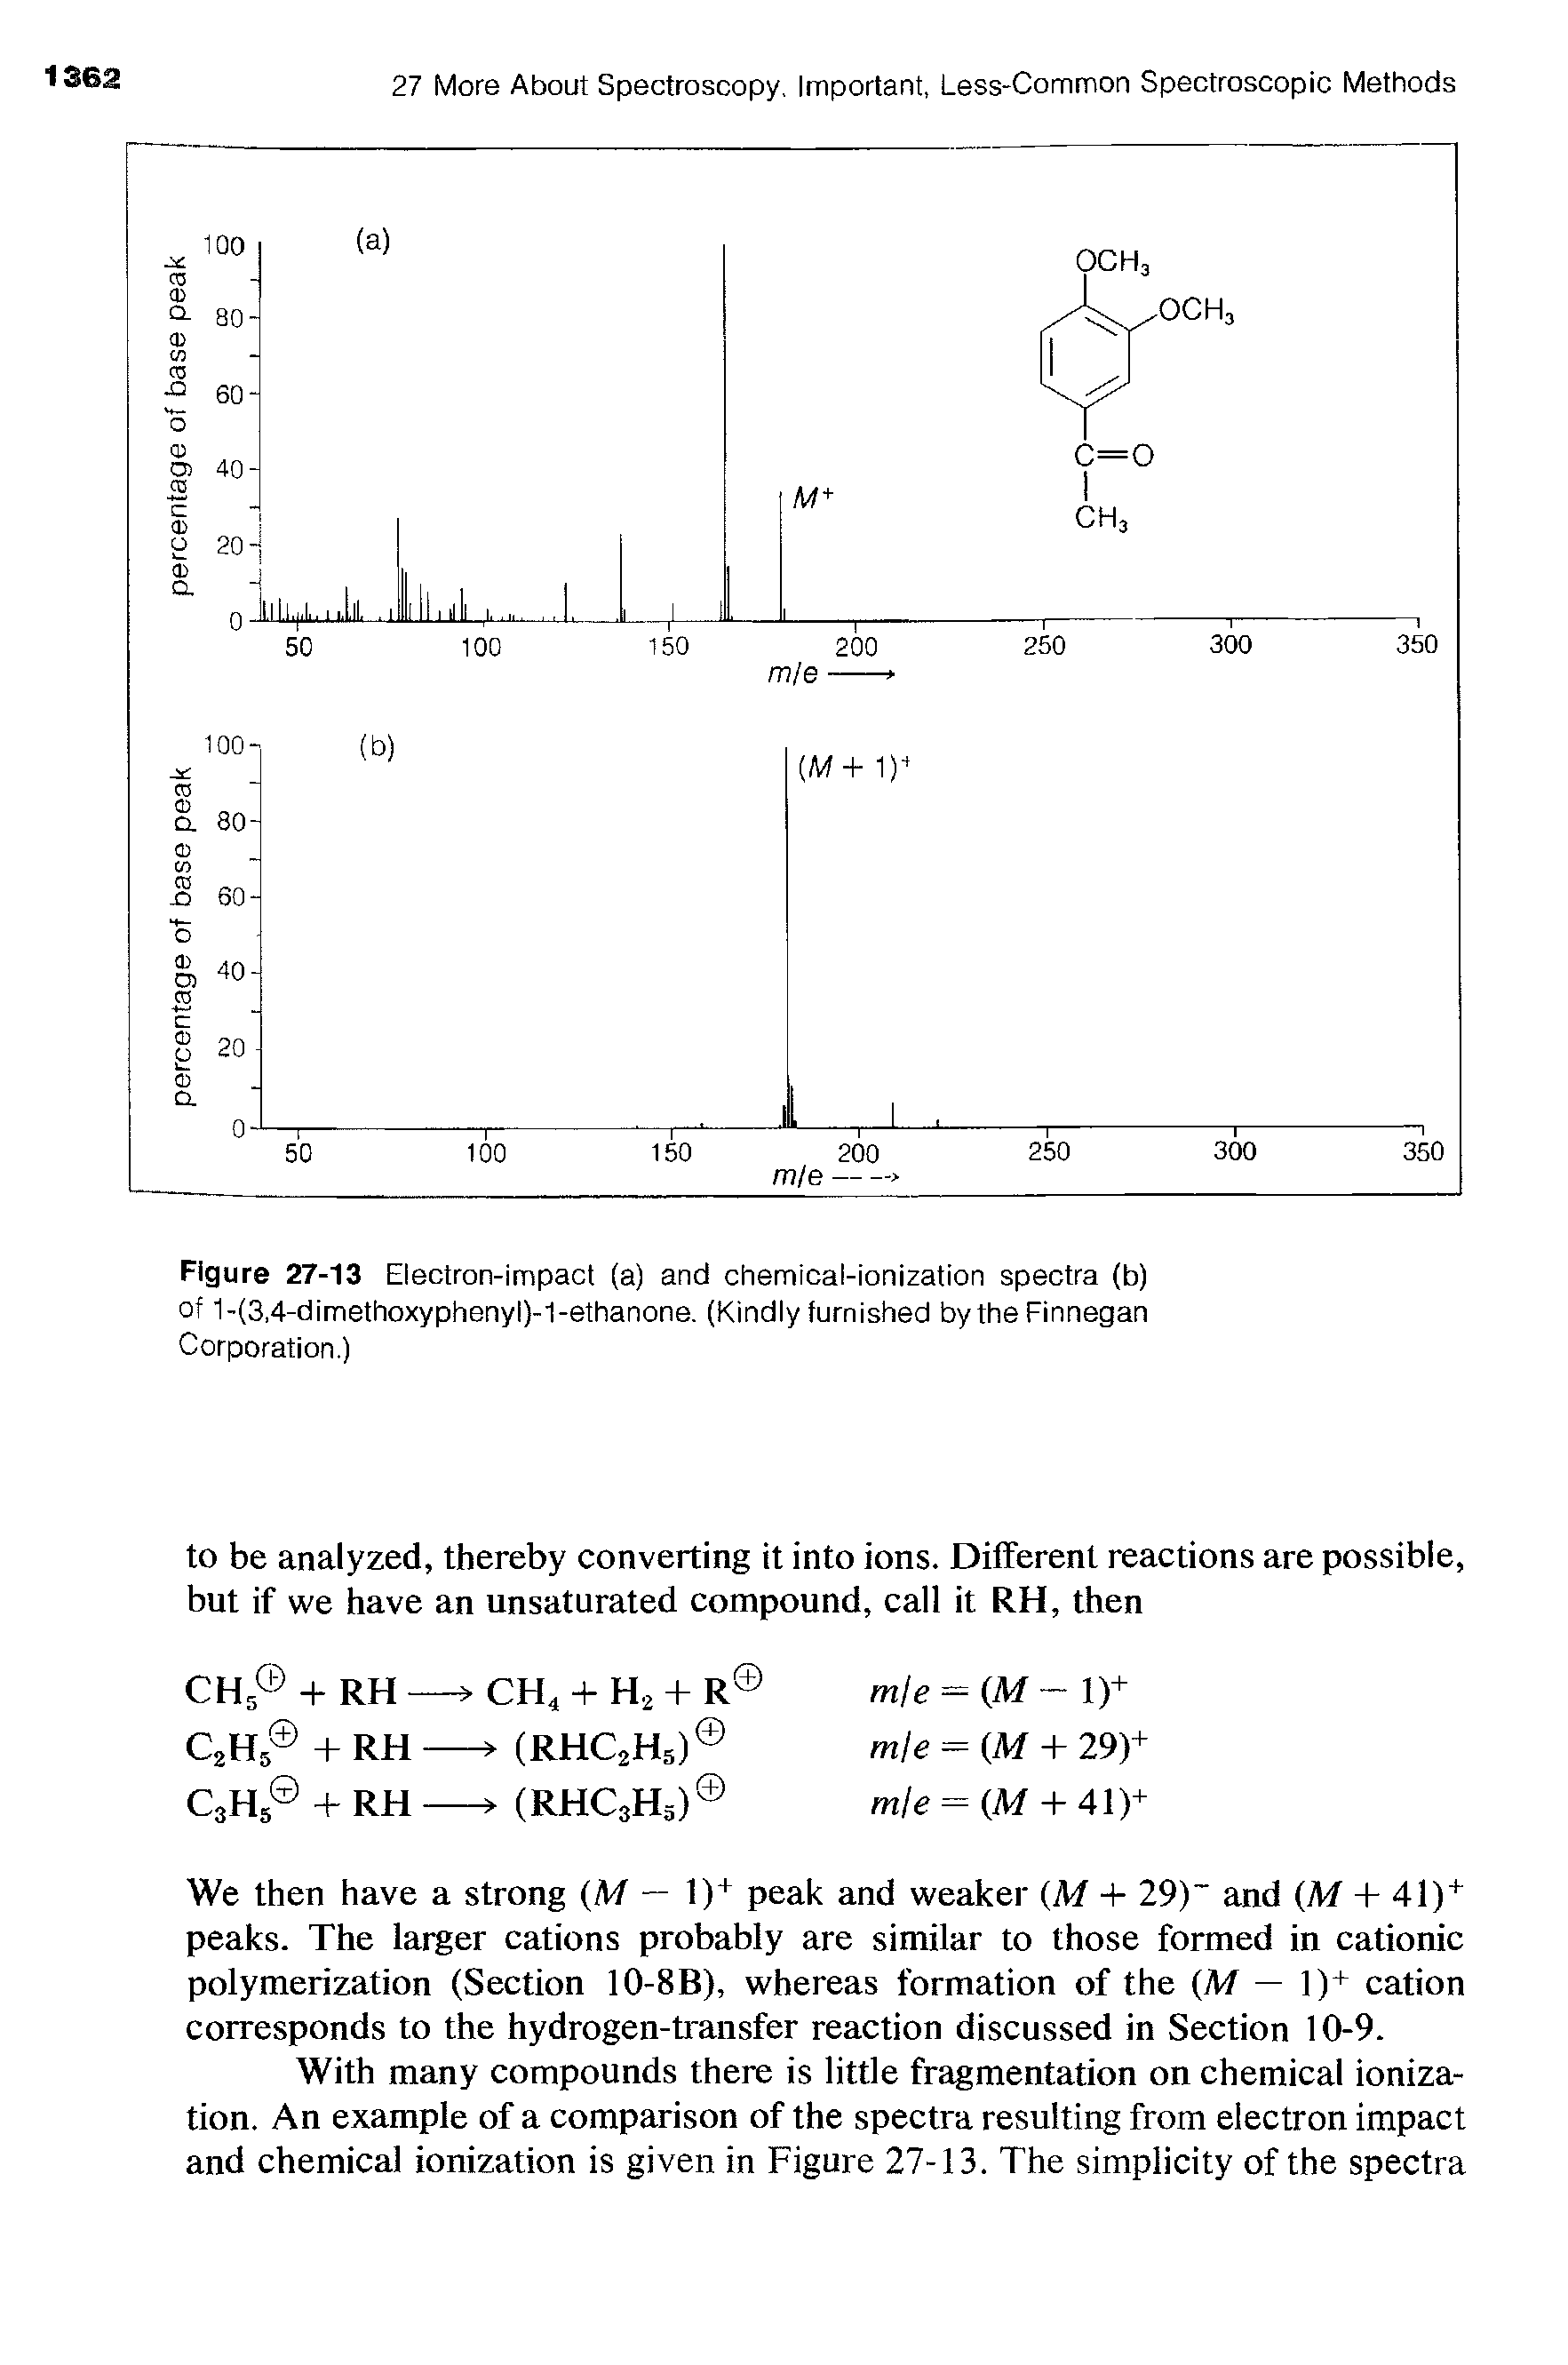 Figure 27-13 Electron-impact (a) and chemical-ionization spectra (b) of 1-(3,4-dimethoxyphenyl)-1-ethanone. (Kindly furnished by the Finnegan Corporation.)...